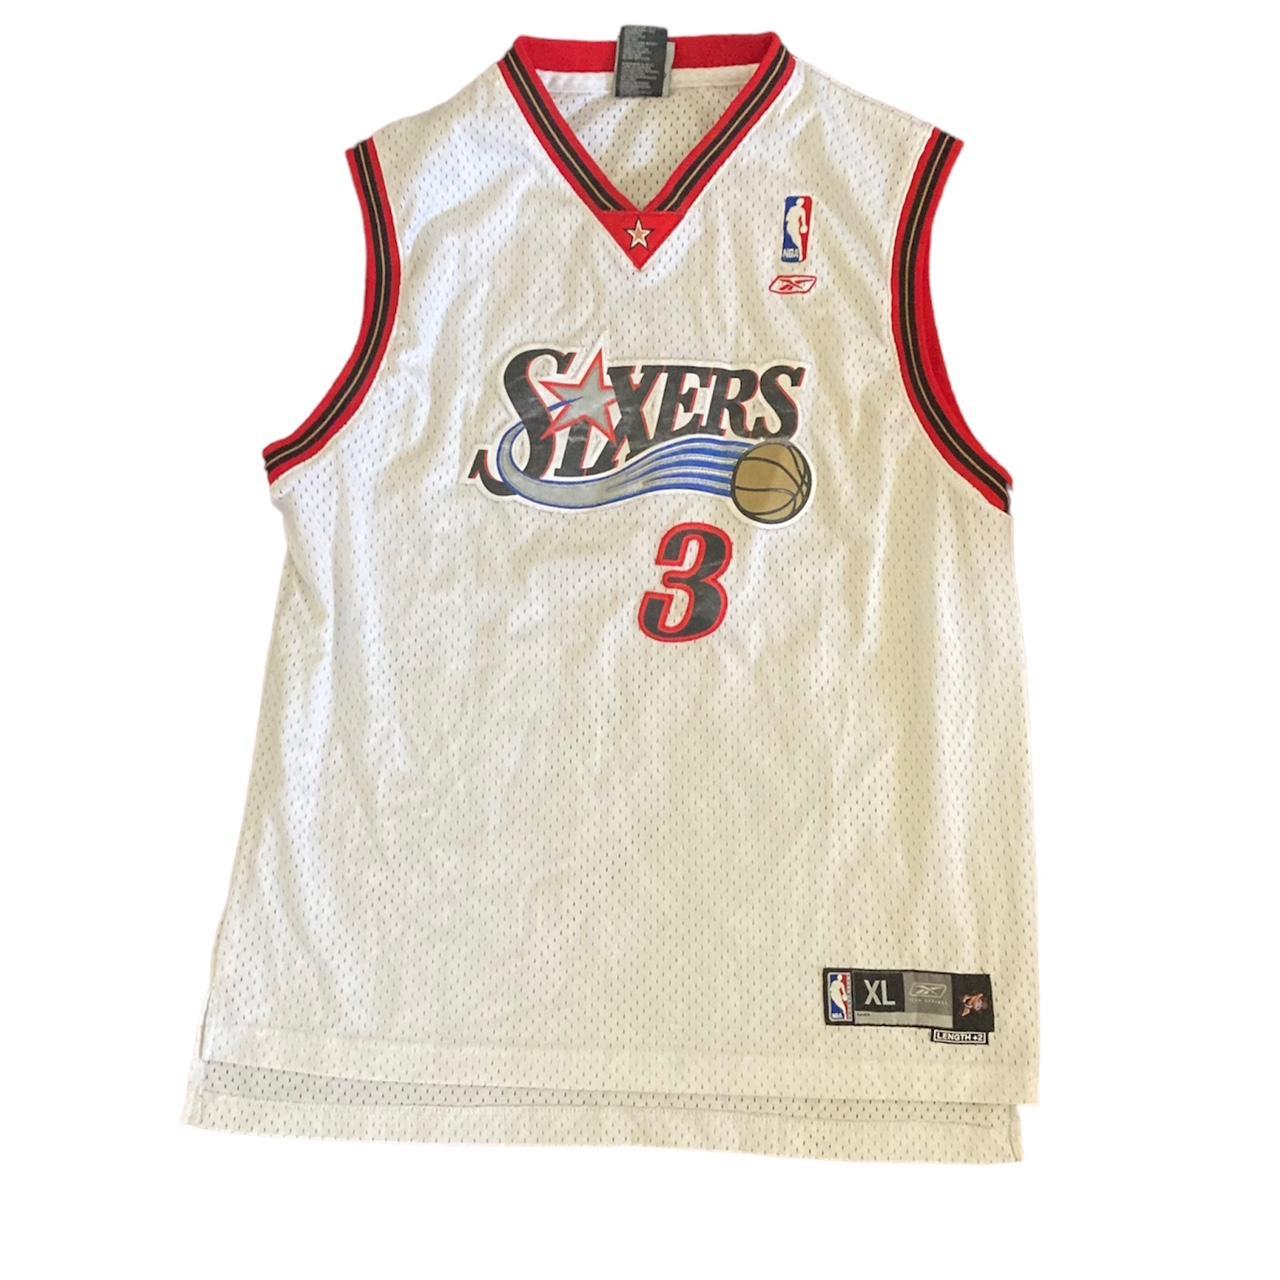 Allen Iverson Black and Gold Sixers XL basketball jersey - Jerseys